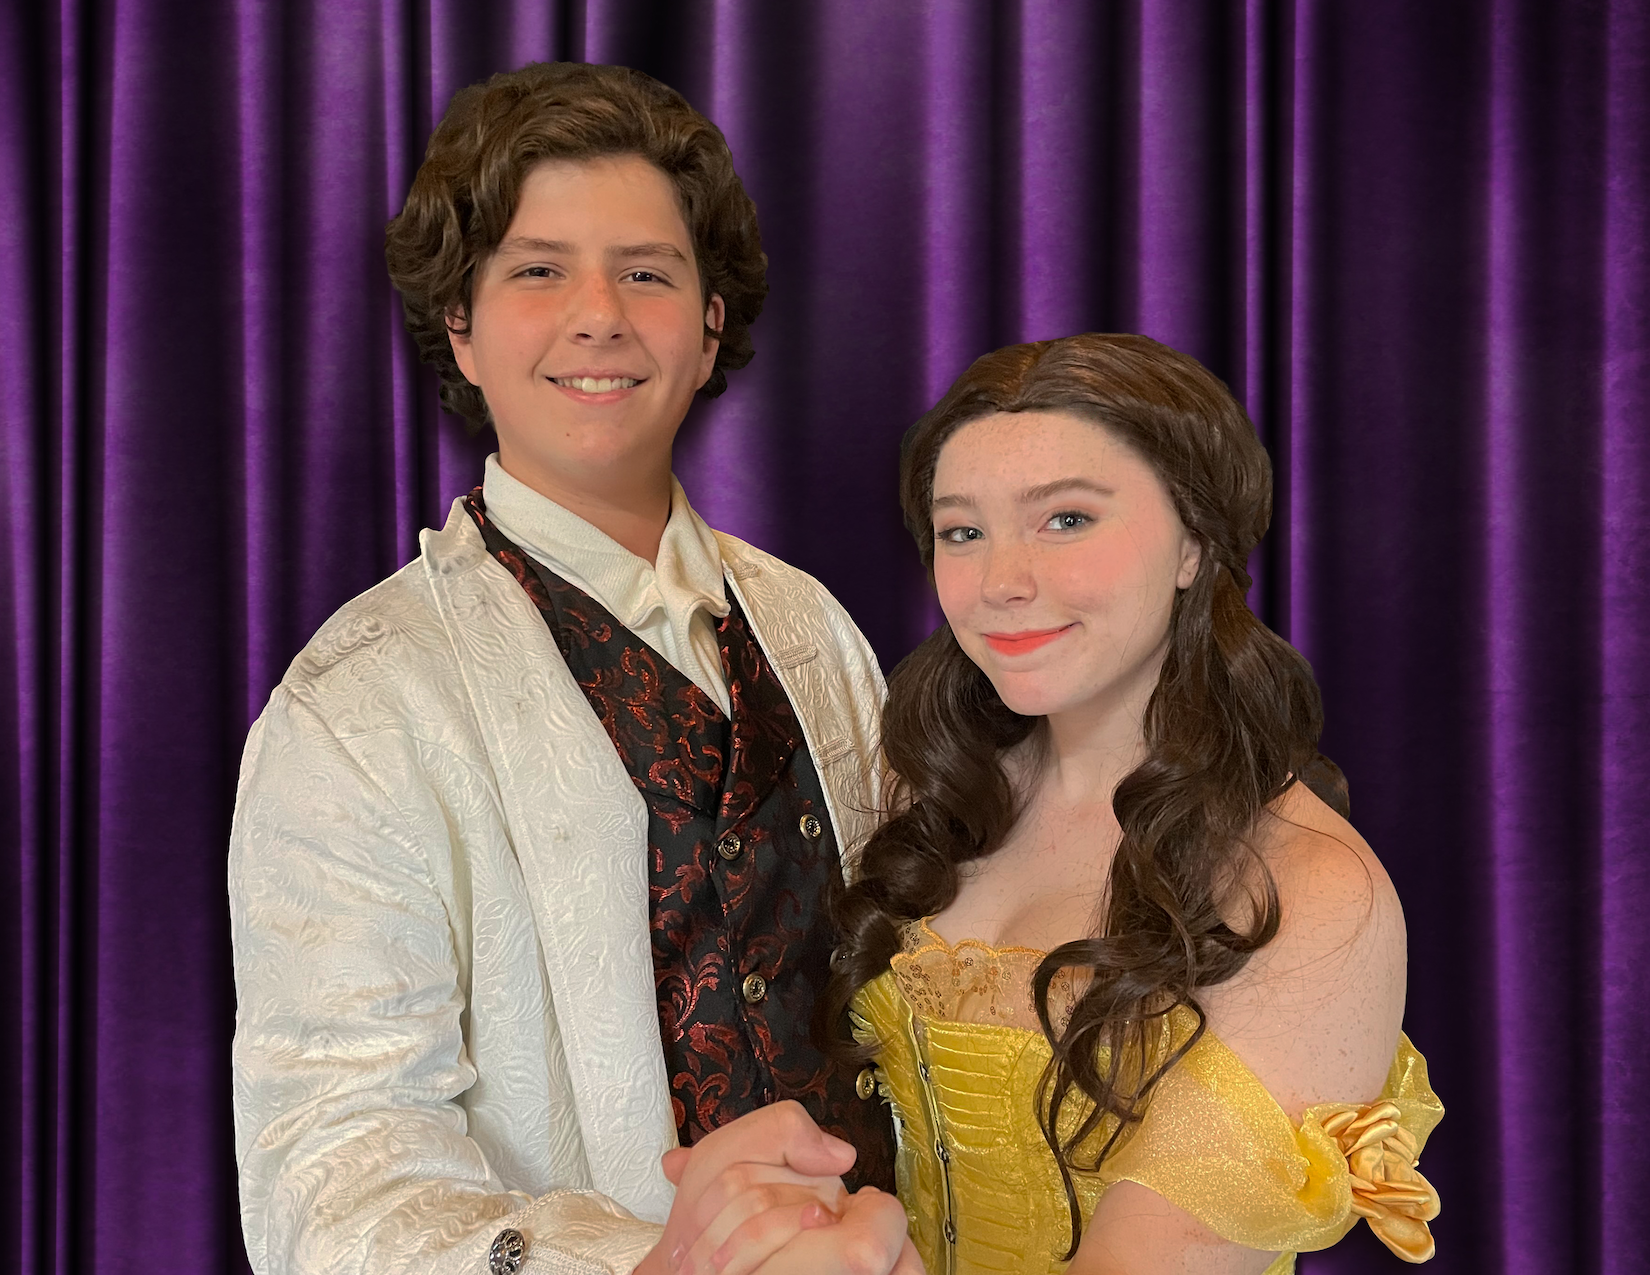 EMERALD COAST THEATRE COMPANY PRESENTS TWO “STUDENTS ON STAGE” EVENTS